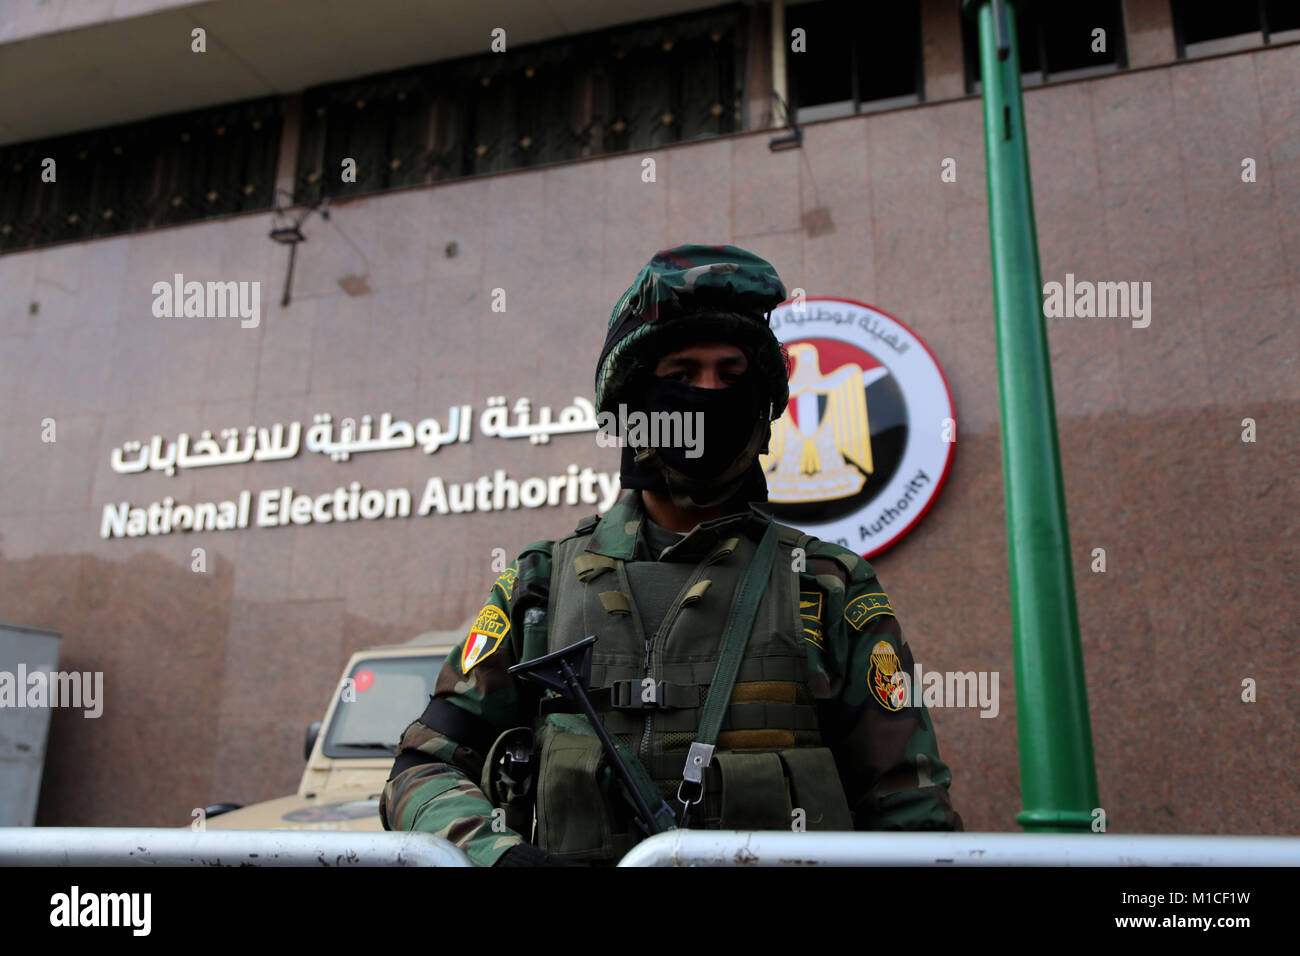 Cairo. 29th Jan, 2018. A special forces soldier stands guard in front of the National Election Authority in Cairo, Egypt on Jan. 29, 2018. The Chairperson of Egypt's Ghad Party, Moussa Mostafa Moussa, presented Monday his candidacy documents for Egyptian presidential elections to the country's election authority, official Ahram Online website reported. Credit: Ahmed Gomaa/Xinhua/Alamy Live News Stock Photo